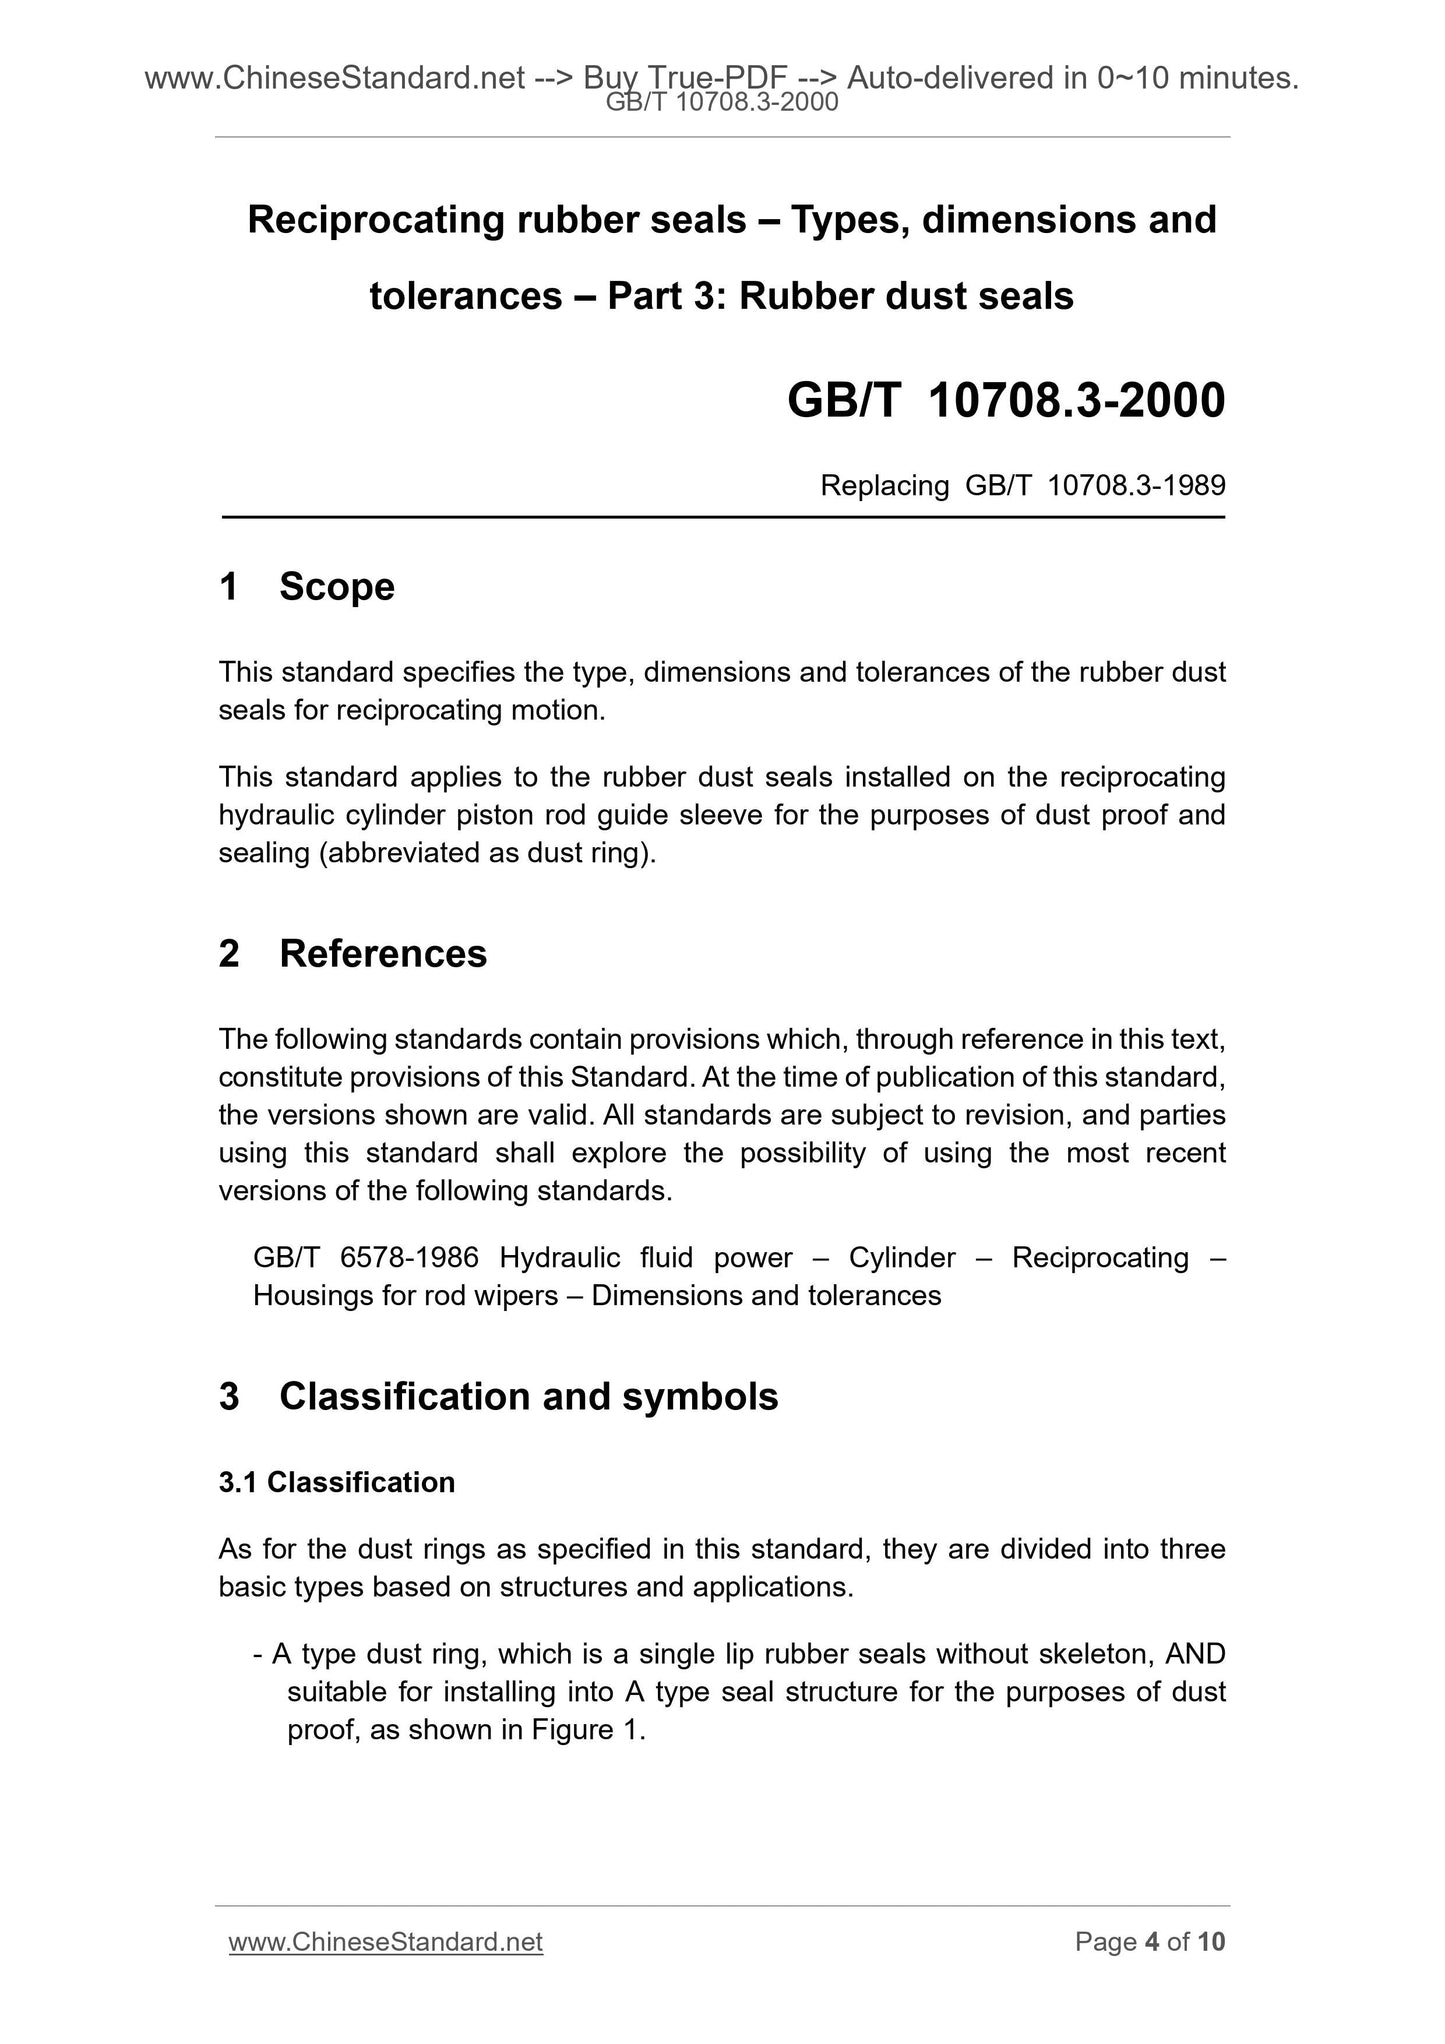 GB/T 10708.3-2000 Page 4